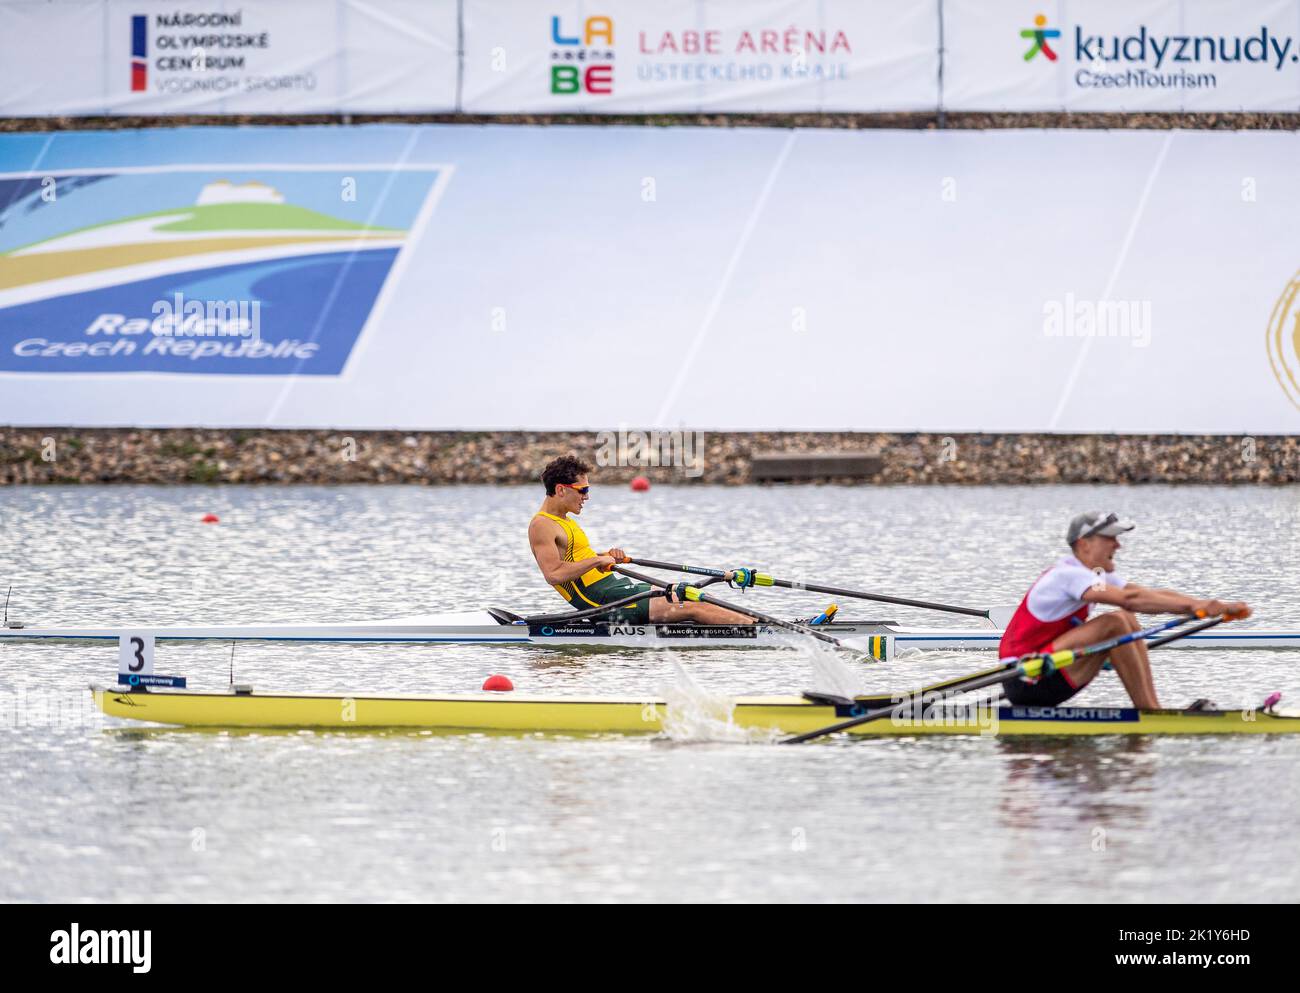 Racice, Czech Republic. 21st Sep, 2022. From left Hamish Harding of Australia and Andri Struzina of Switzerland competing during Day 4 of the 2022 World Rowing Championships at the Labe Arena Racice on September 21, 2022 in Racice, Czech Republic. Credit: Ondrej Hajek/CTK Photo/Alamy Live News Stock Photo